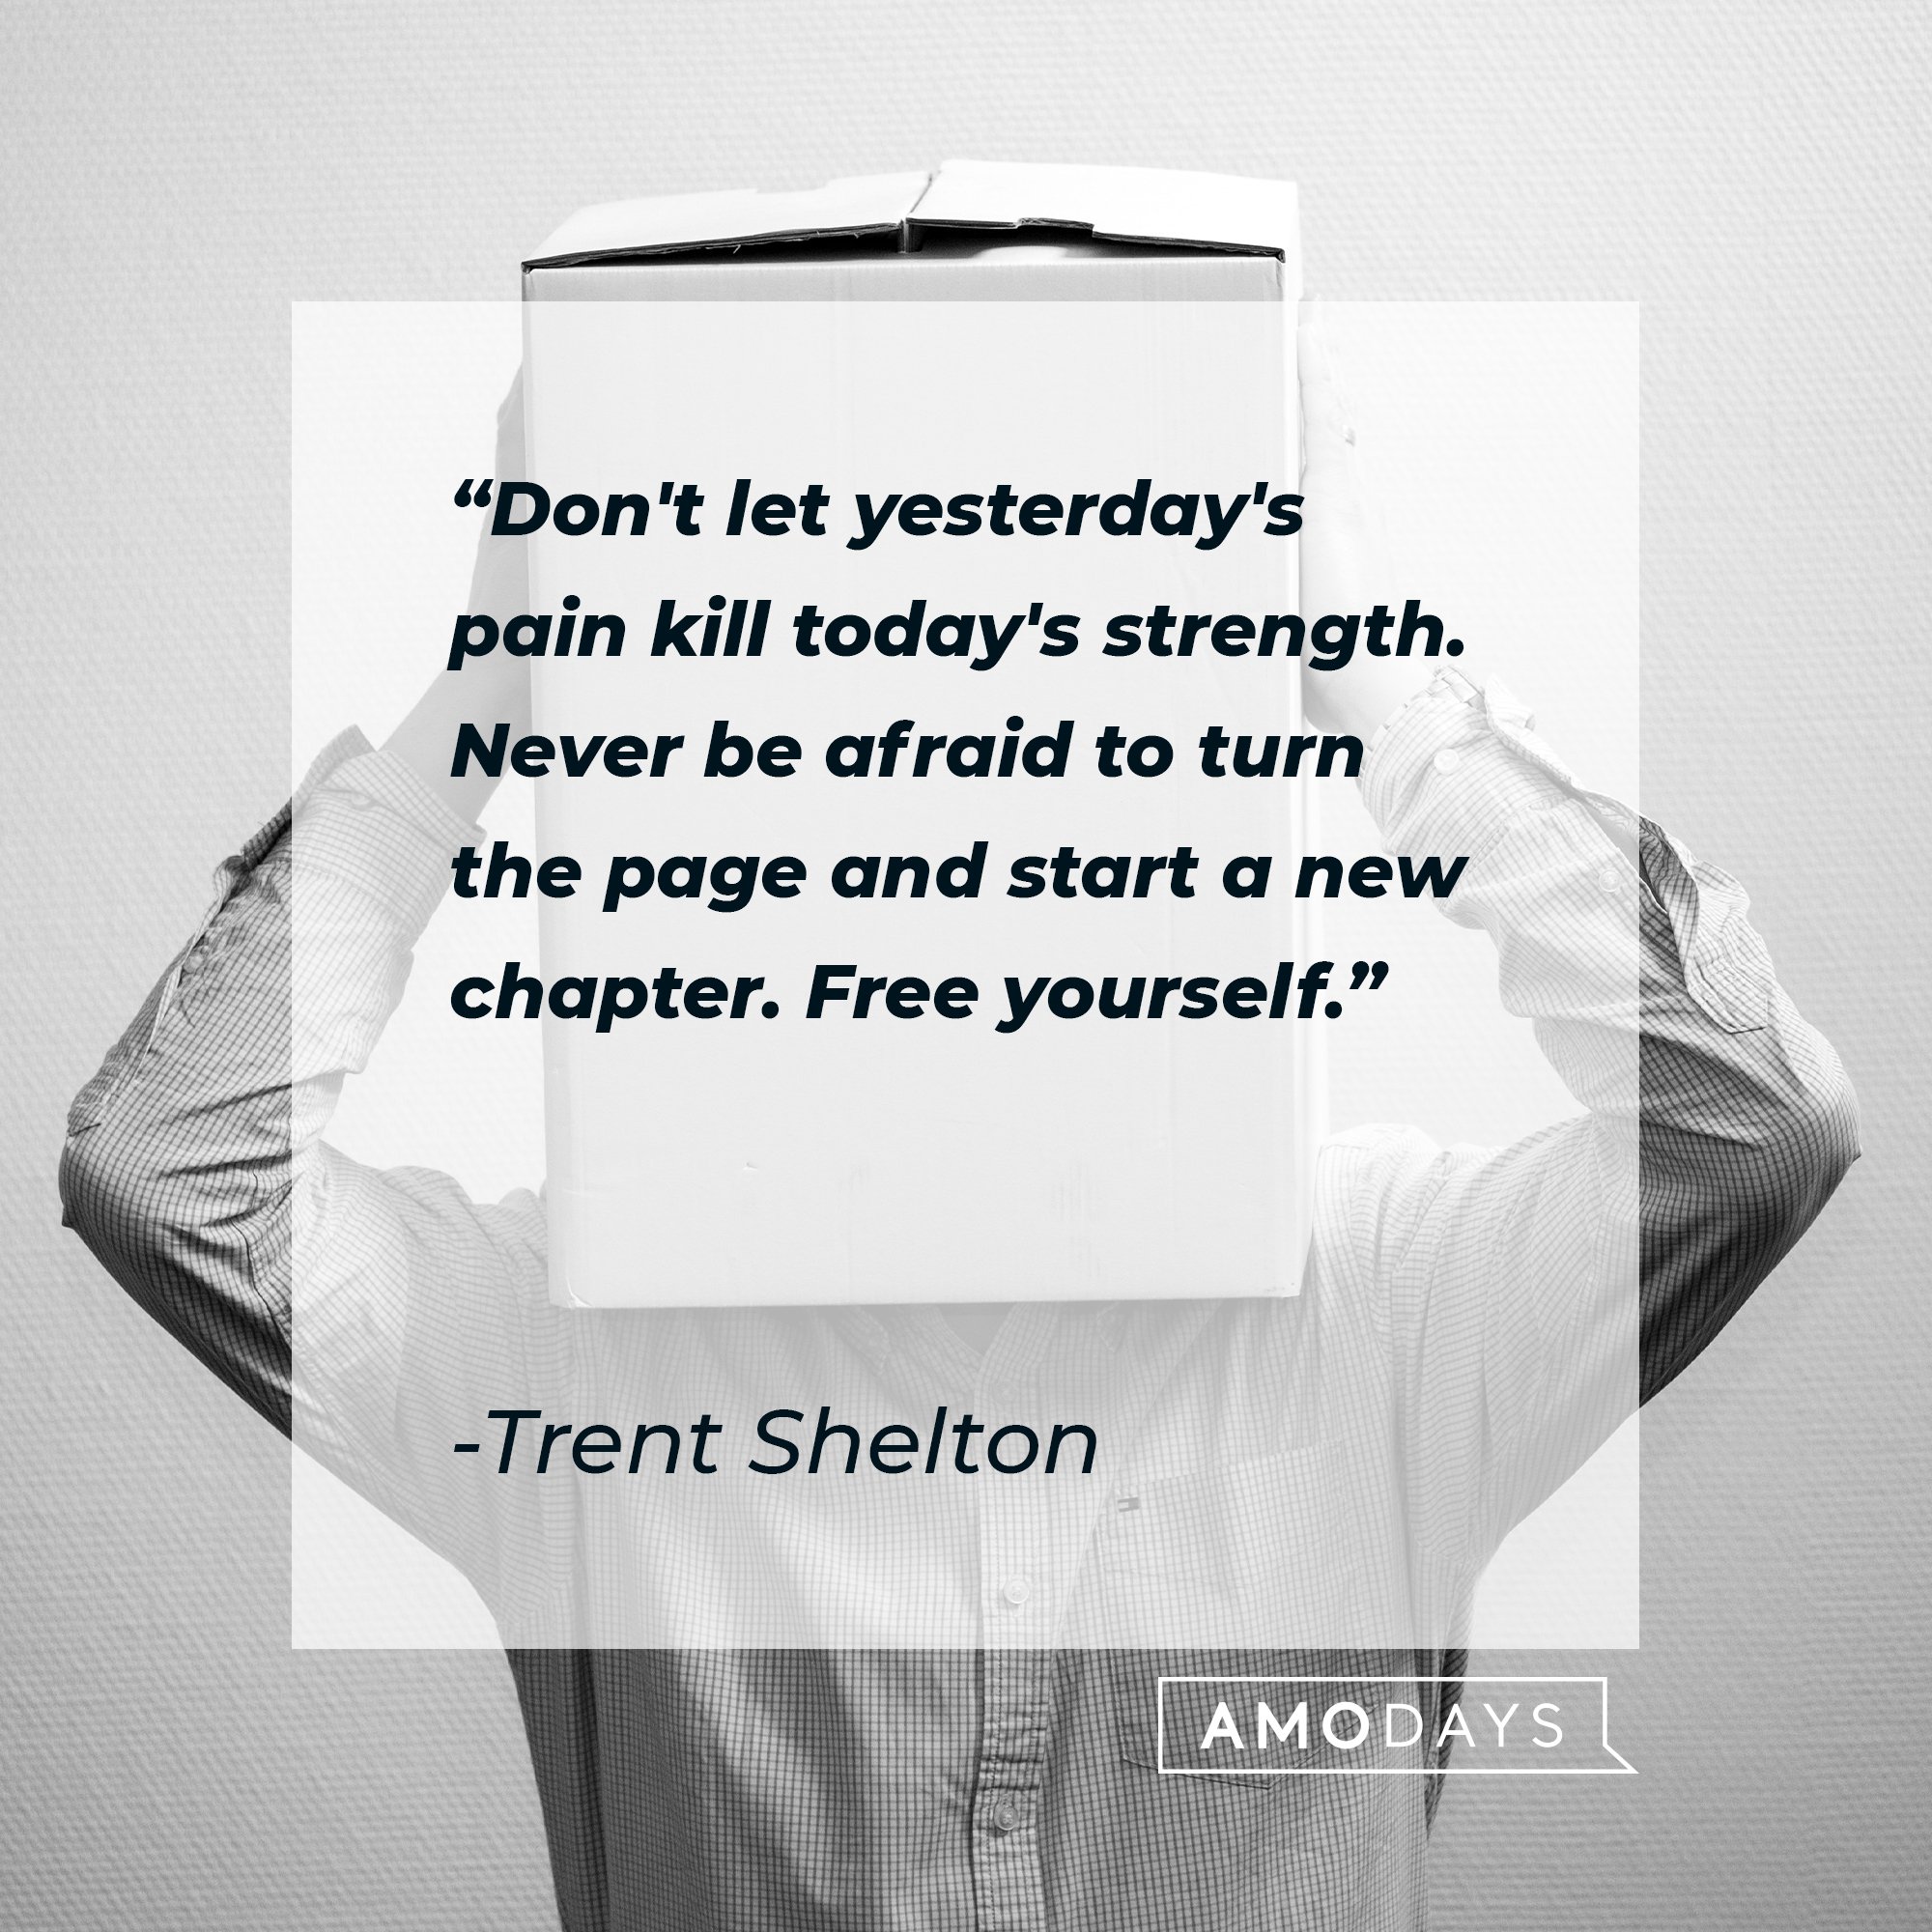  Trent Shelton's quote: "Don't let yesterday's pain kill today's strength. Never be afraid to turn the page and start a new chapter. Free yourself." | Image: AmoDays